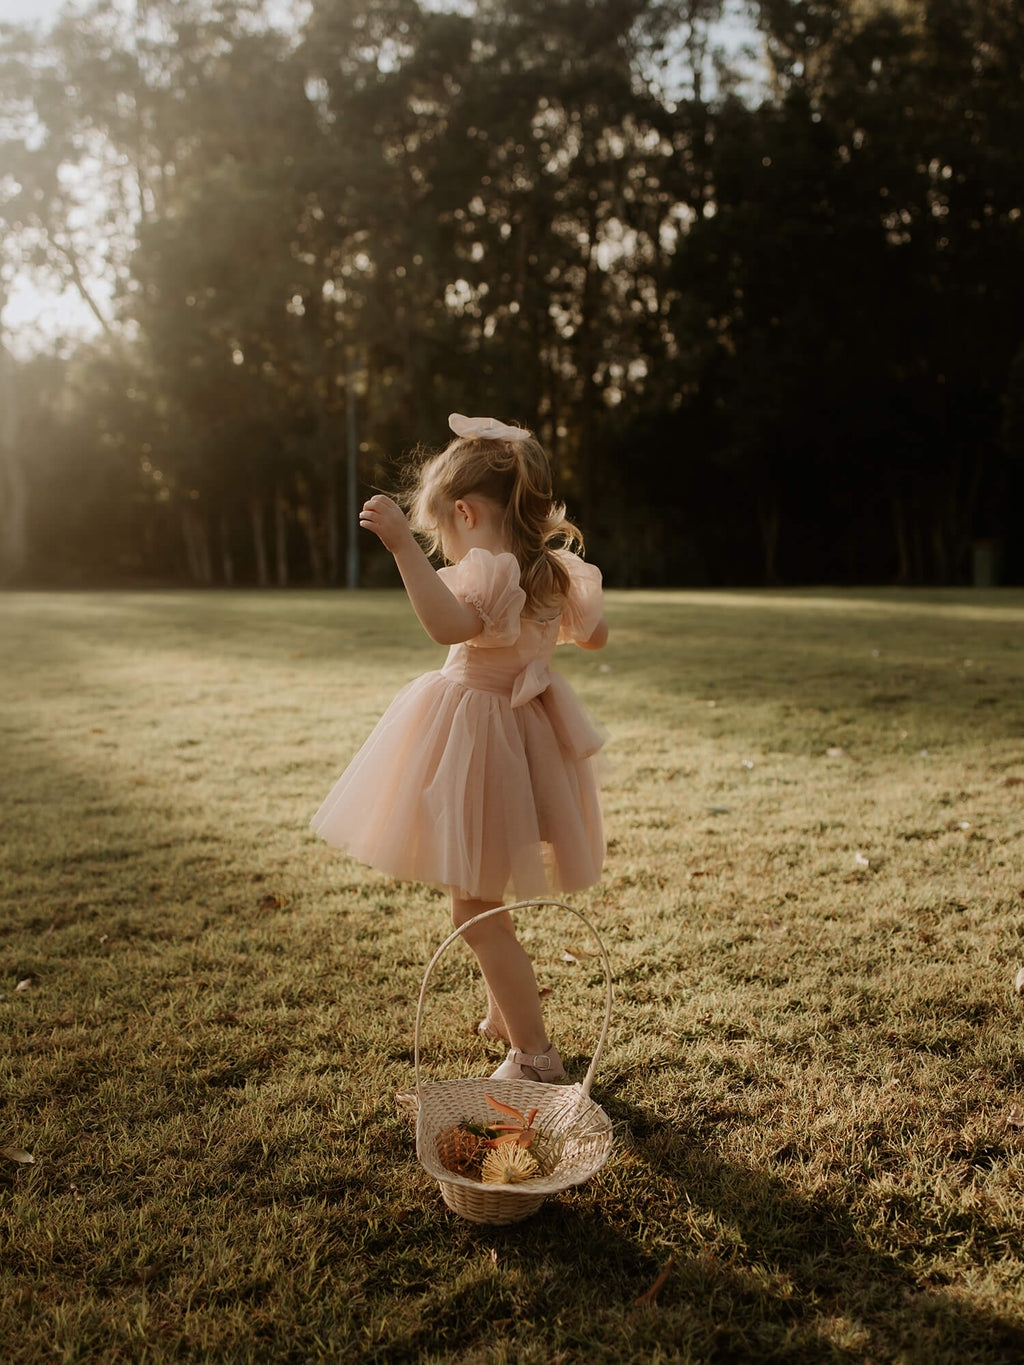 Layla champagne flower girl dress with puff sleeves is worn by a young girl, she also wears a matching tulle bow in her hair.